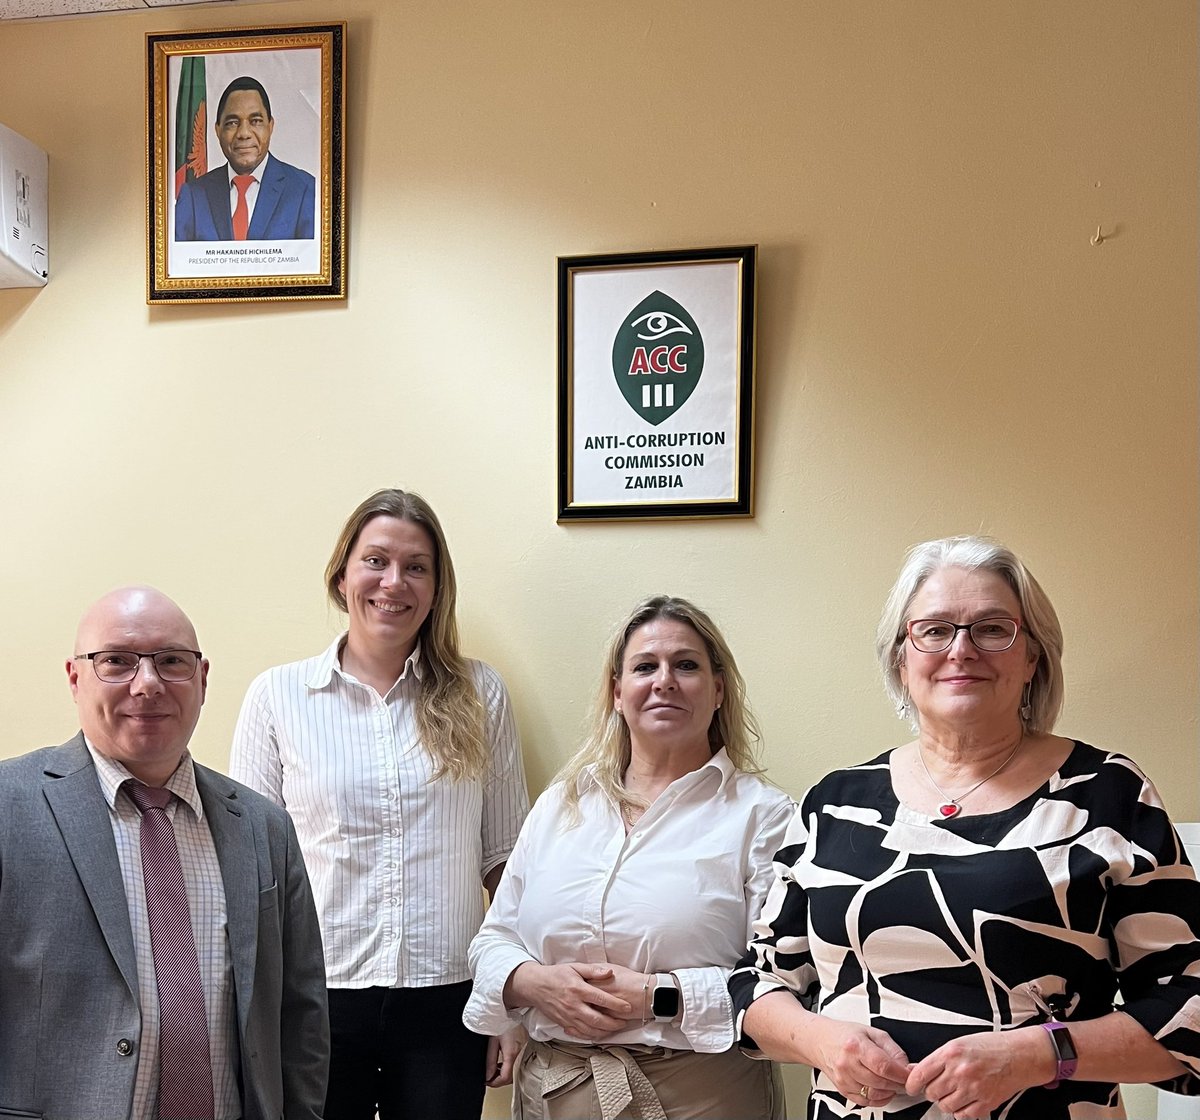 Experts from Finland in Lusaka 👍 Year 2023 has started in our Twinning project “Peer-to-Peer institutional support to the Anti-Corruption in Zambia” @ACCZambia @HAUSfi #anticorruption #capacitydevelopment @UllaJS @TanjaStormbom